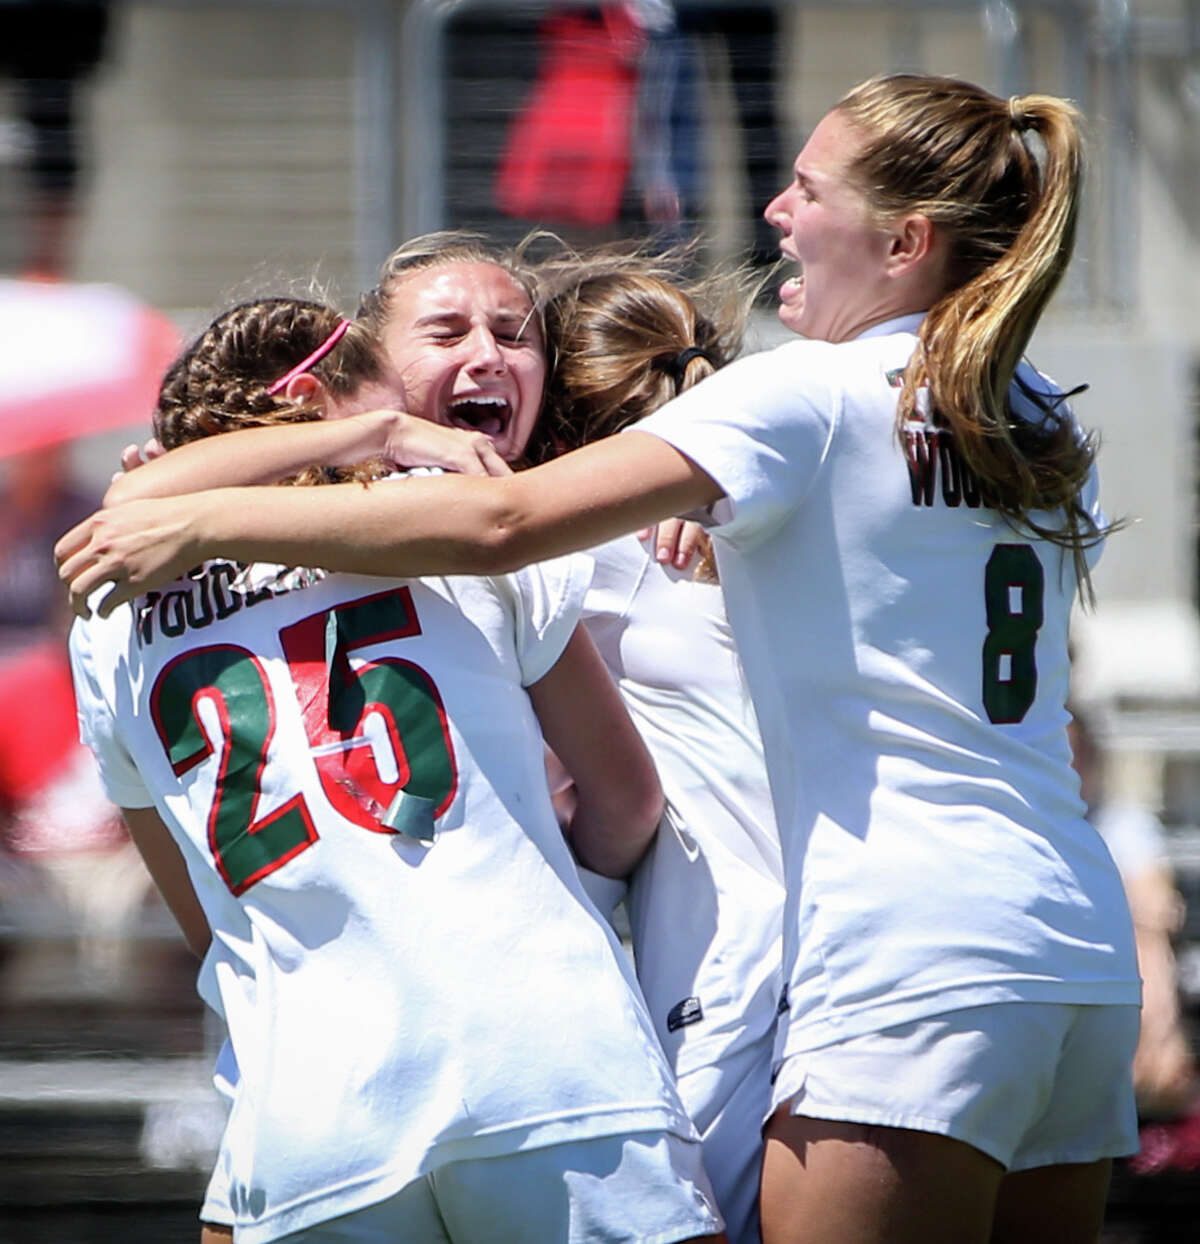 The Woodlands Lady Highlanders celebrate during the varsity girls soccer game against Klein on Friday, April 7, 2017, at Kelly Reeves Stadium in Austin.